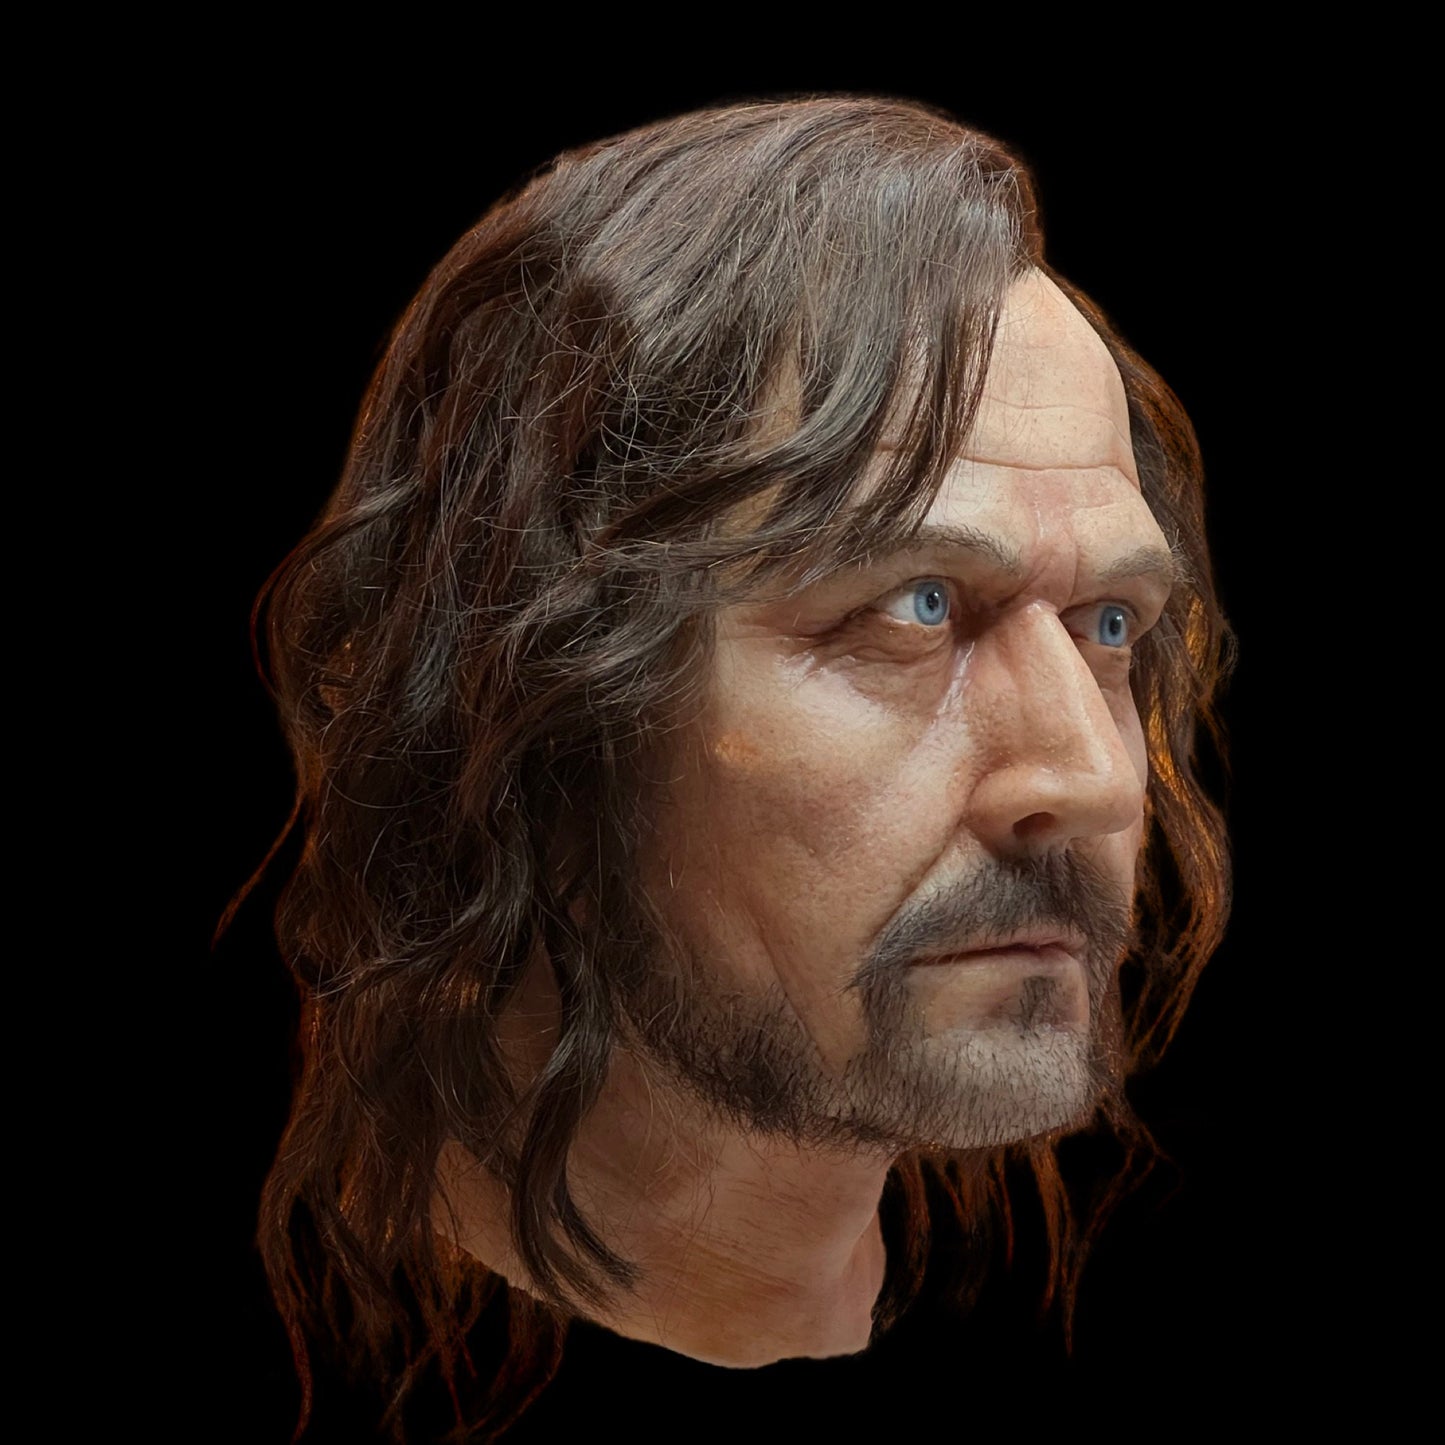 Sirius Black - Harry Potter - 1:1 life-size silicone bust - made to order